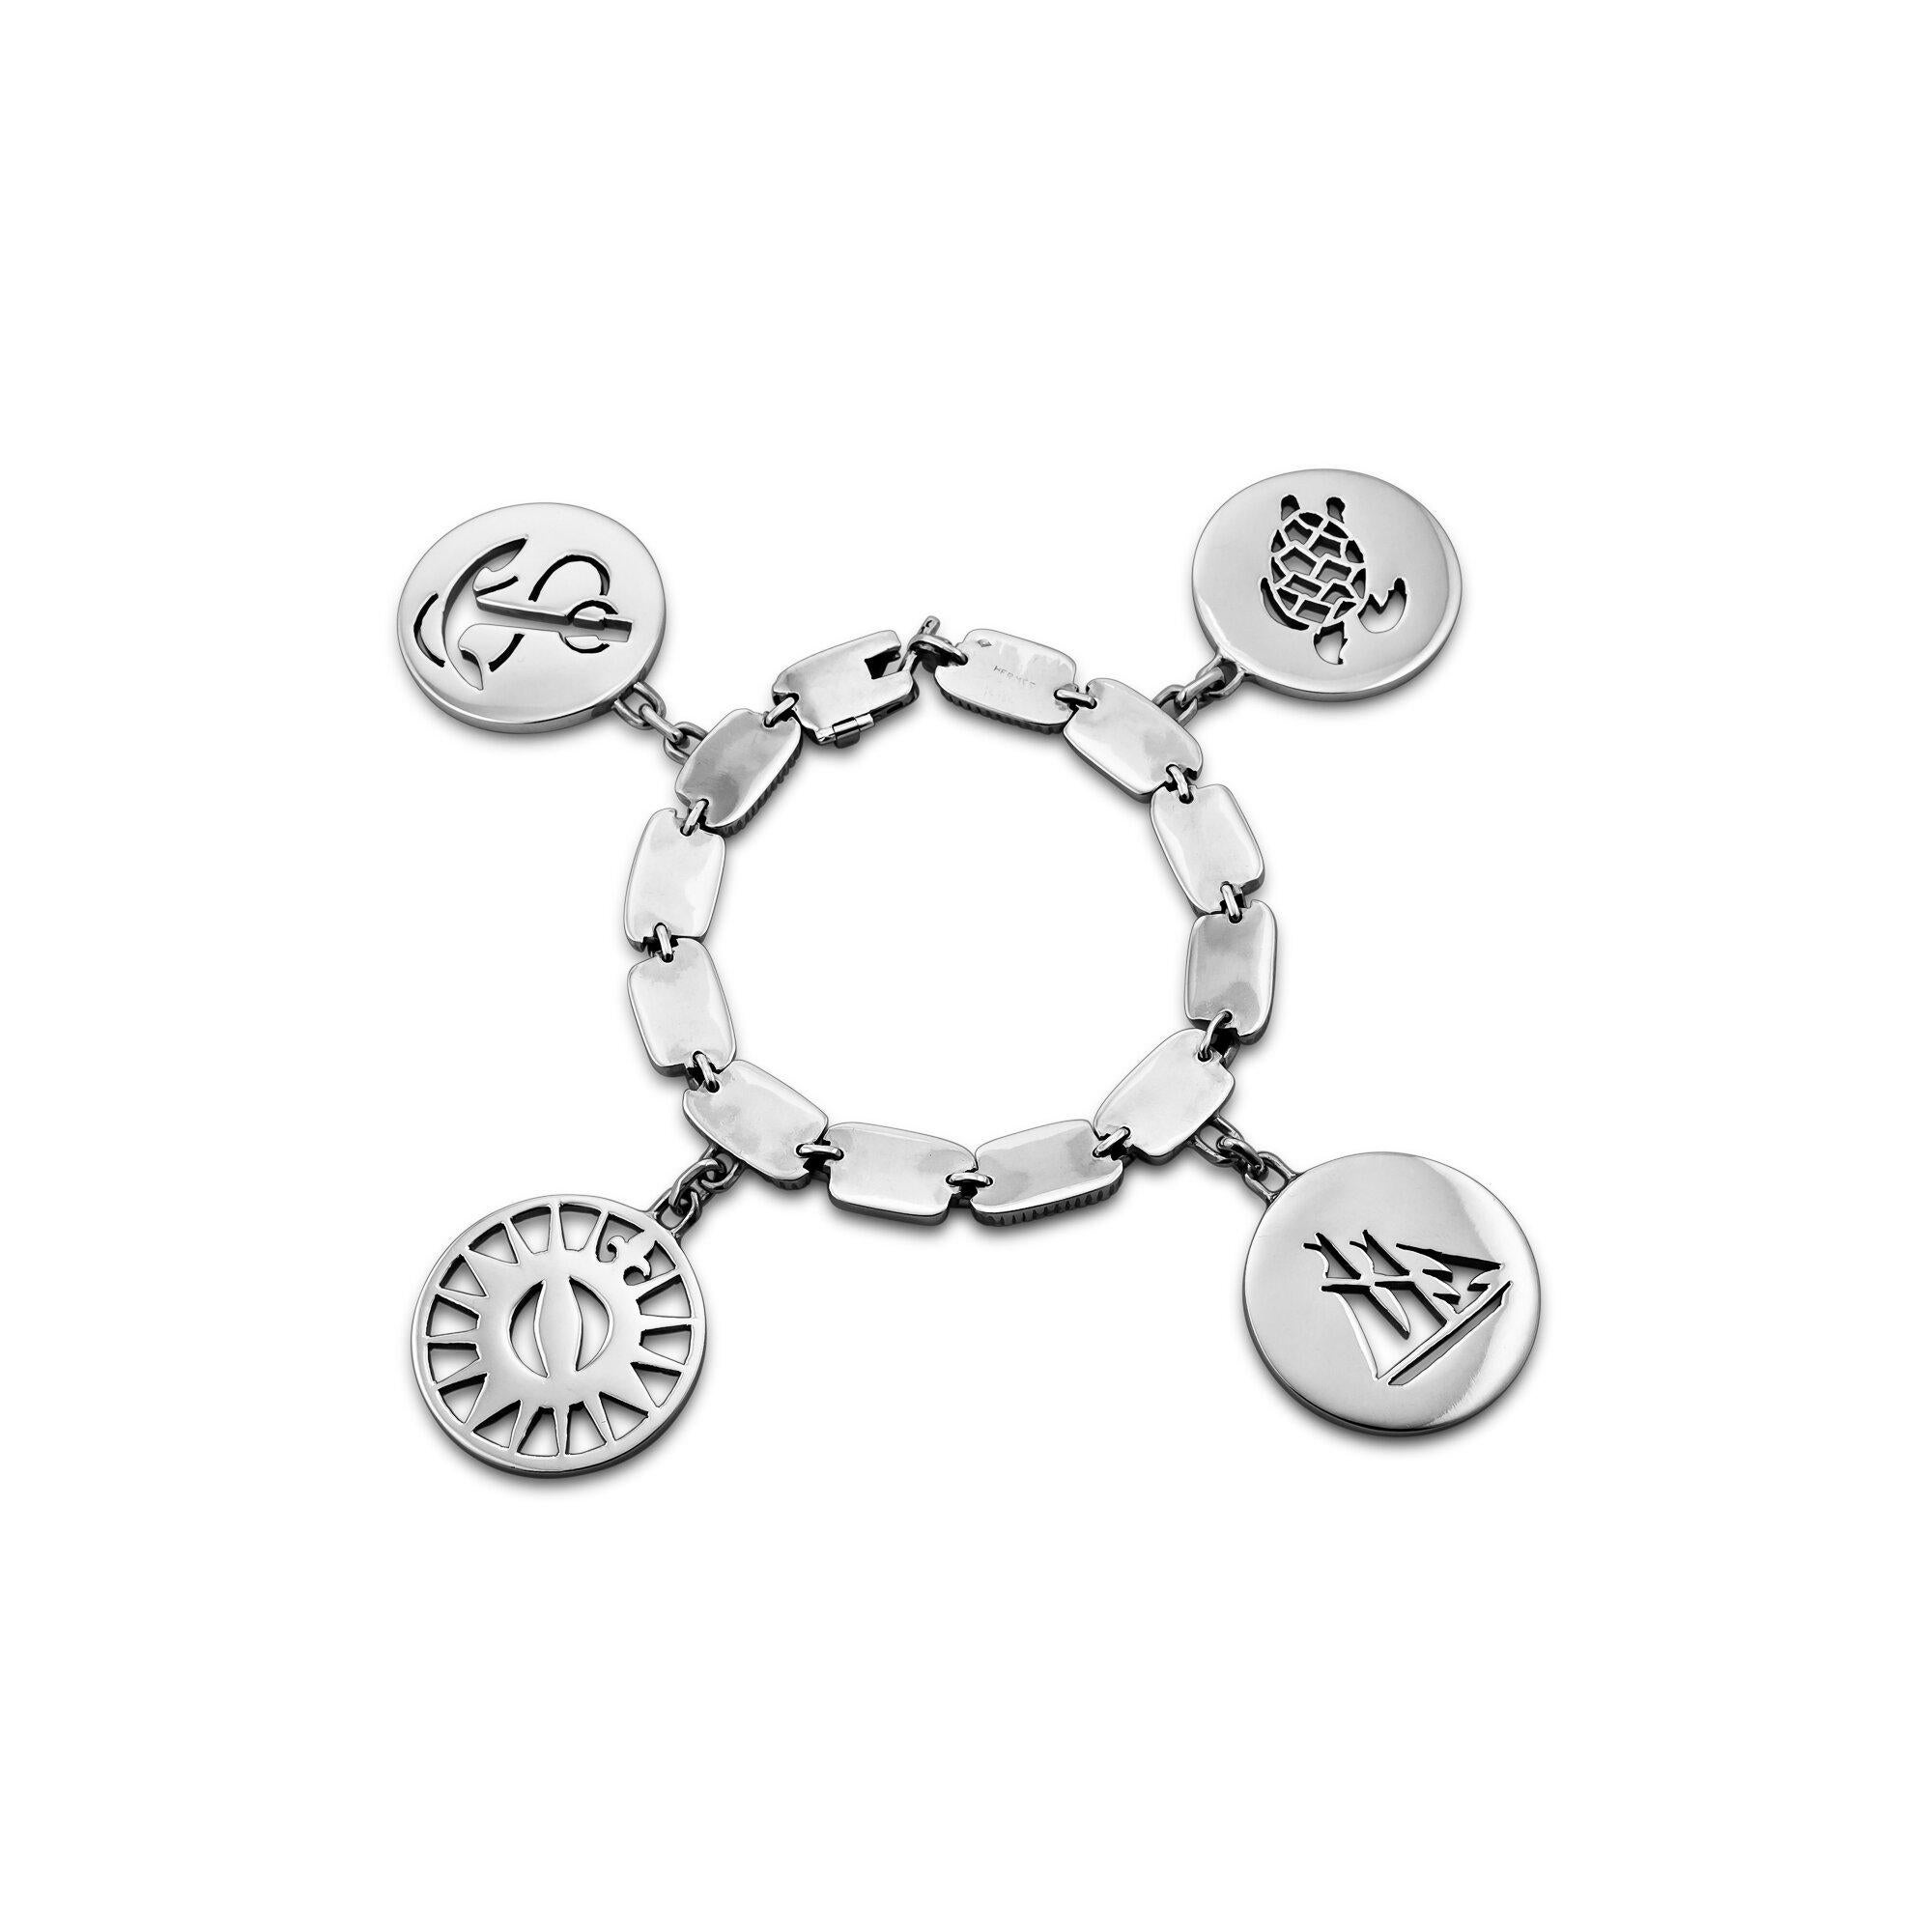 It will always be 'smooth sailing' when wearing this incredible vintage Hermes Paris four charm Nautical link bracelet.  With an anchor, a compass, a sailboat, and a sea turtle pierced disc charm hanging from a flat link/rope chain bracelet, you